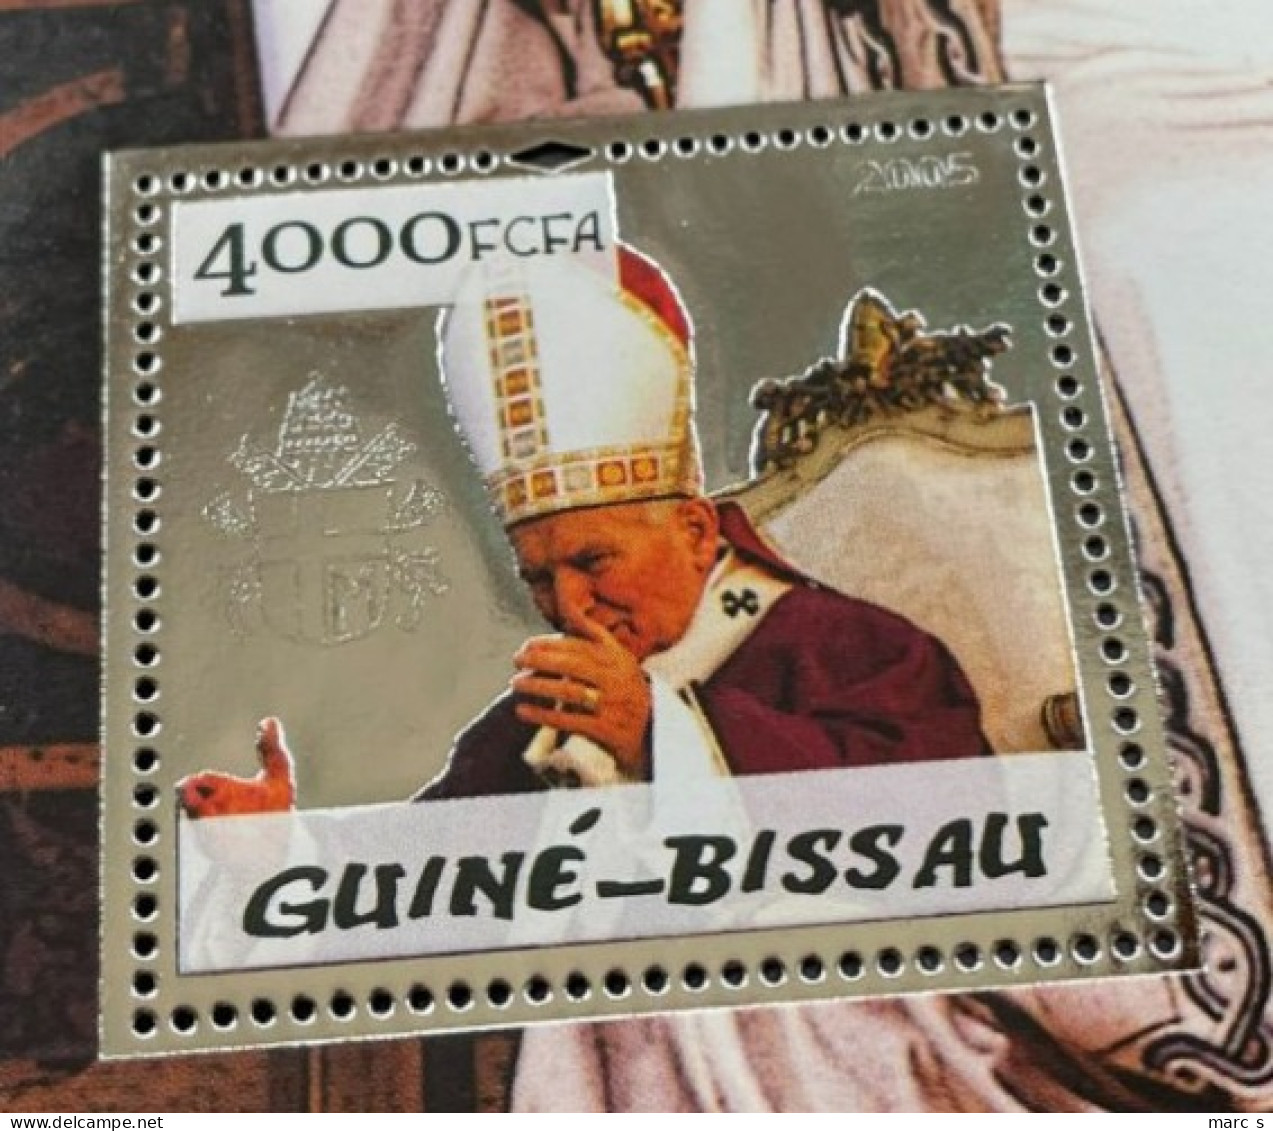 GUINEE BISSAU 2005 - NEUF**/MNH - LUXE - SHEET BLOC BF - GOLD OR + SILBER ARGENT - RARE - PAPE JEAN PAUL BENOIT - Guinea-Bissau